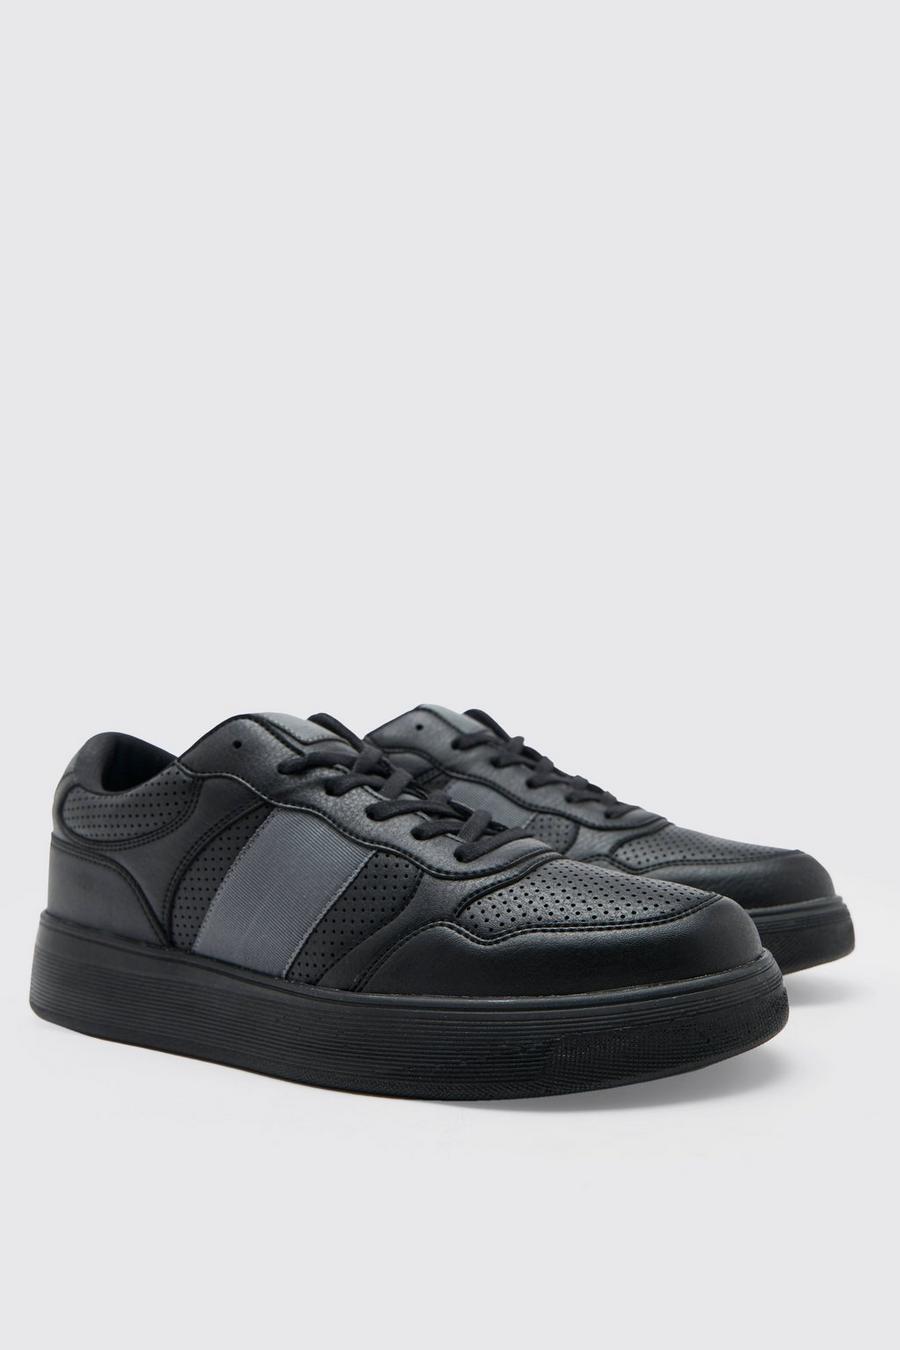 Black Perforated Contrast Tape Trainer